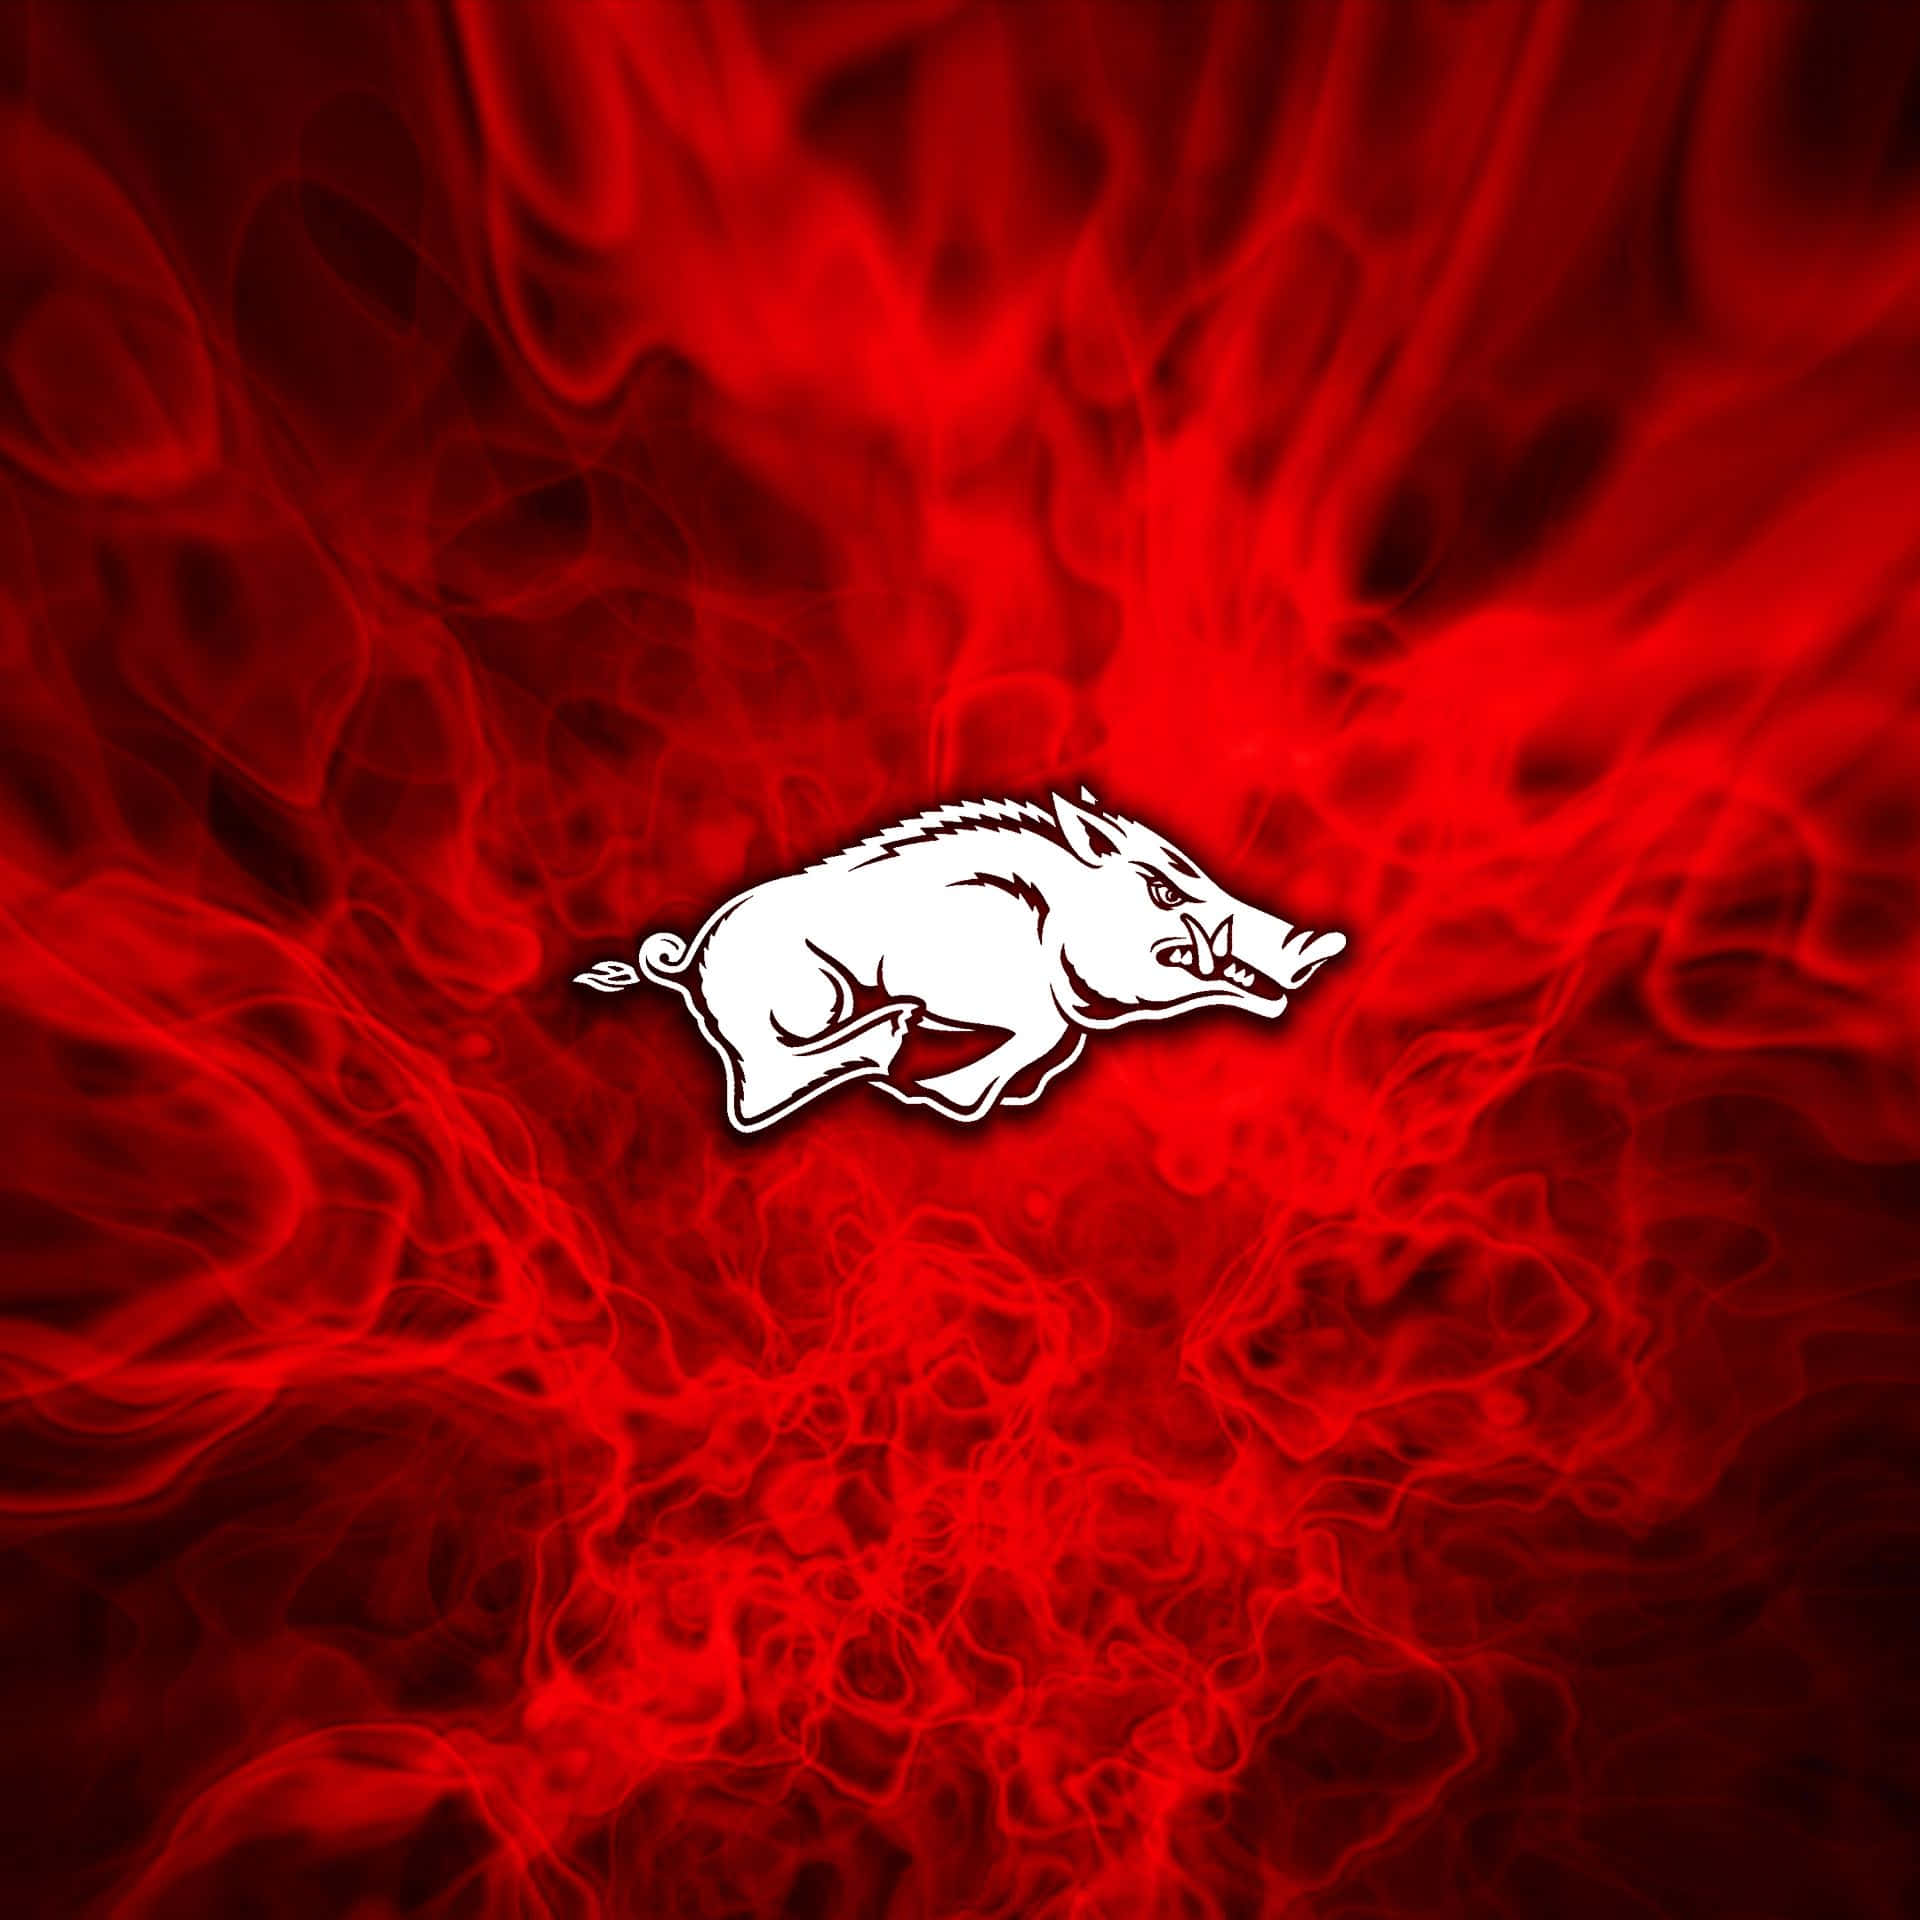 Representing the state of Arkansas, the Razorbacks proudly stand athwart their opponents. Wallpaper